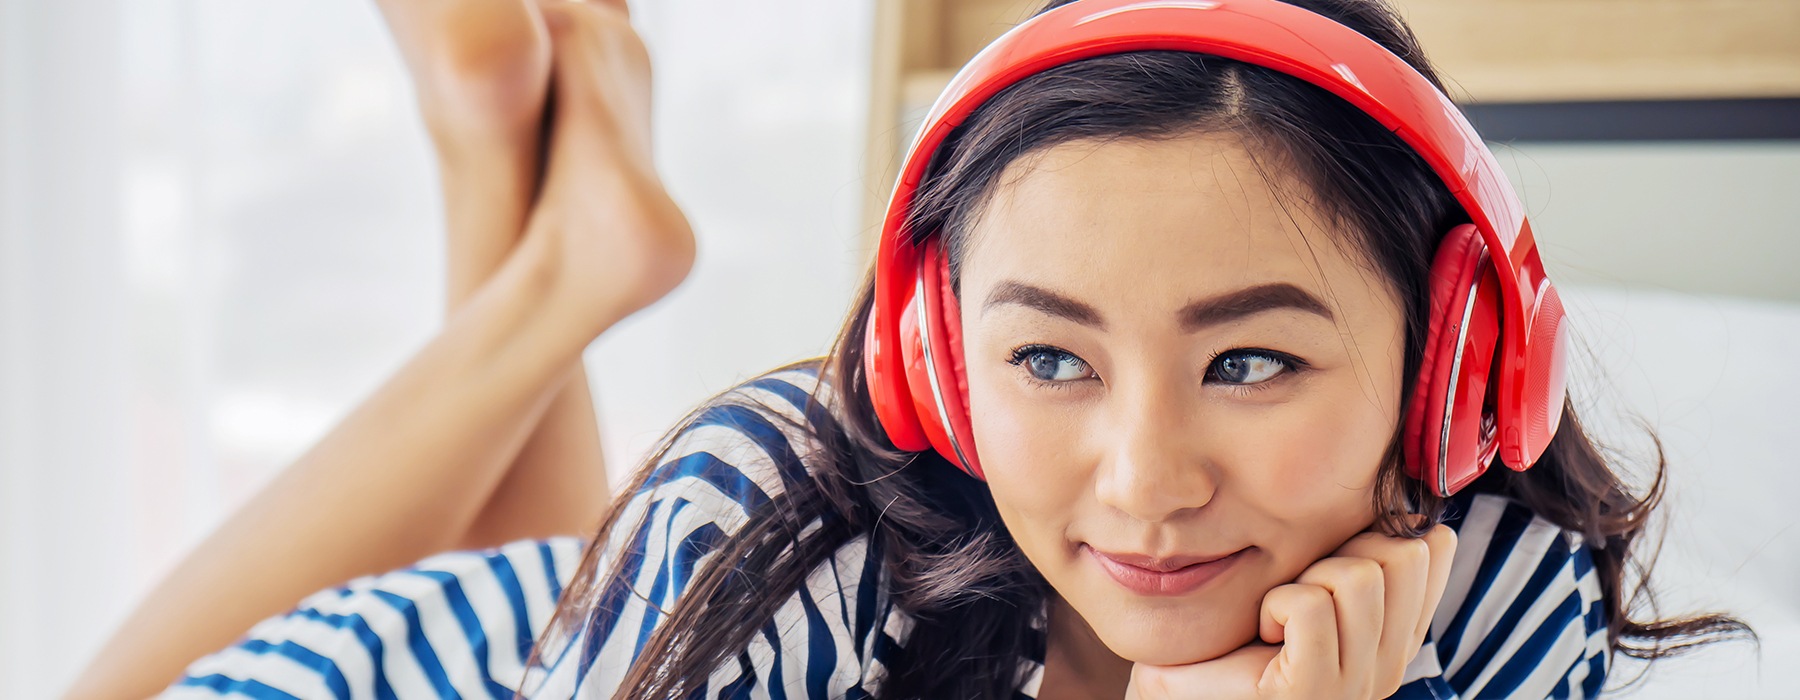 lifestyle image of a young woman listening to music through over-the-ear headphones